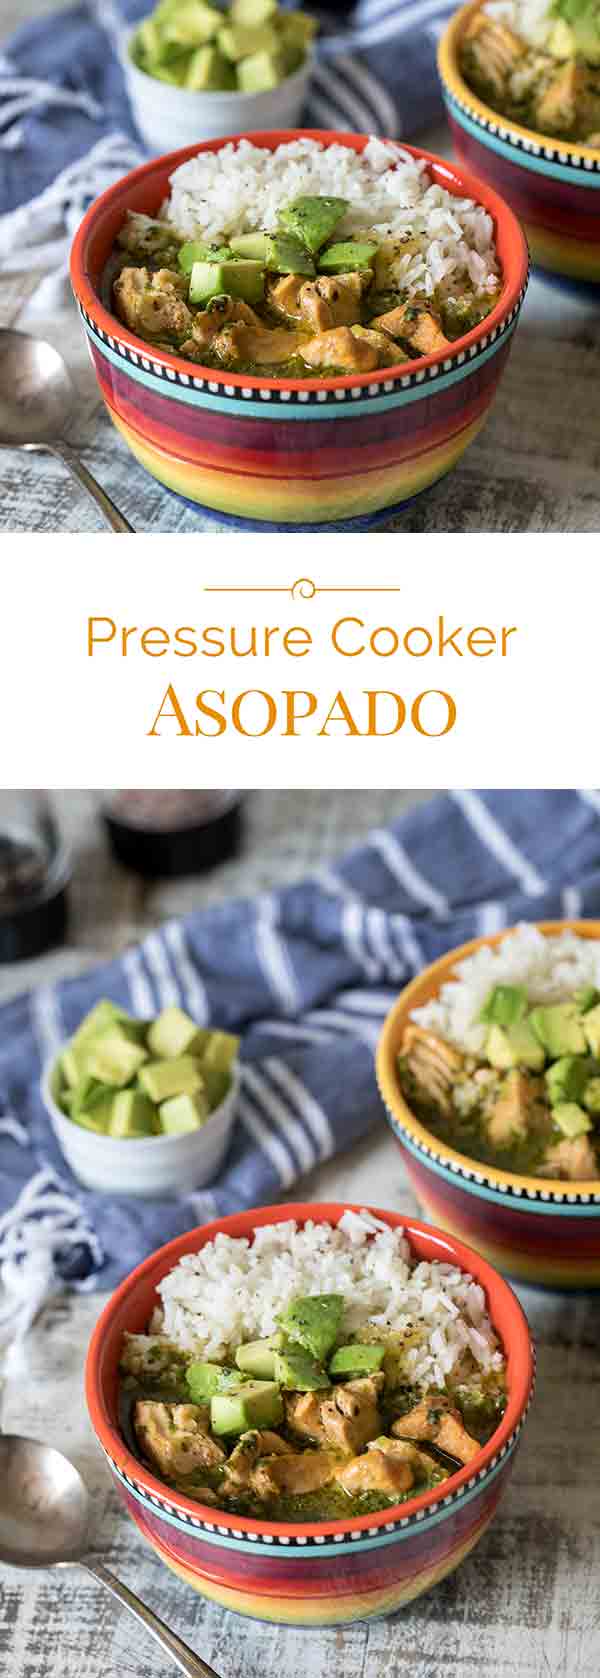 Asopado is a sort of a cross between soup and paella. This&nbsp;Pressure Cooker Asopado is quick and easy to make and has a bright fresh flavor.&nbsp;